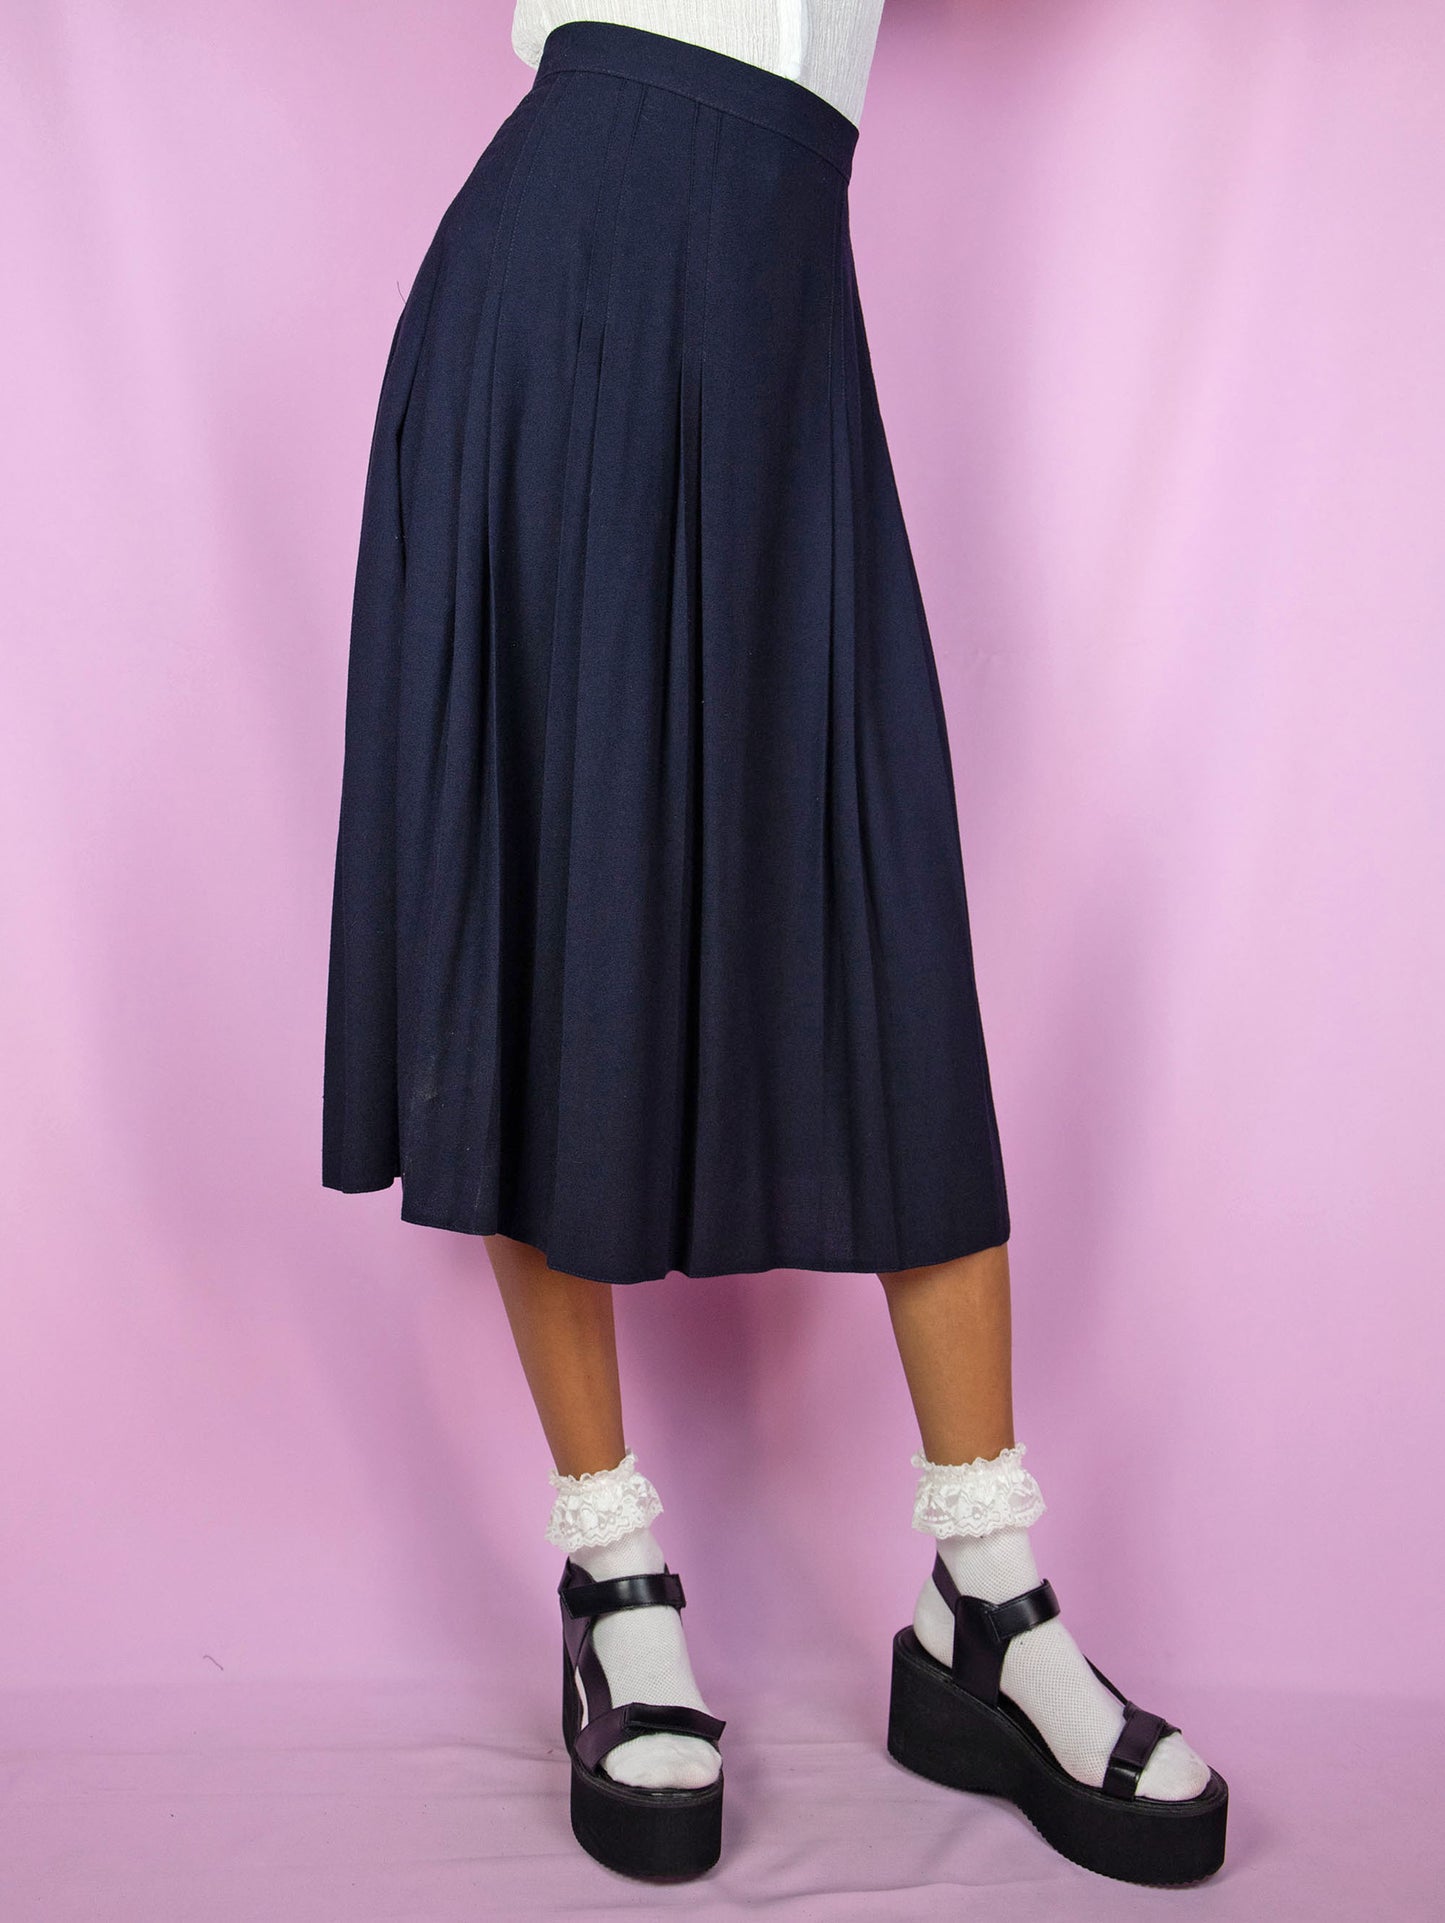 The Vintage 90s Navy Pleated Midi Skirt is a dark blue skirt with a side zipper closure. Classic preppy 1990s skirt.